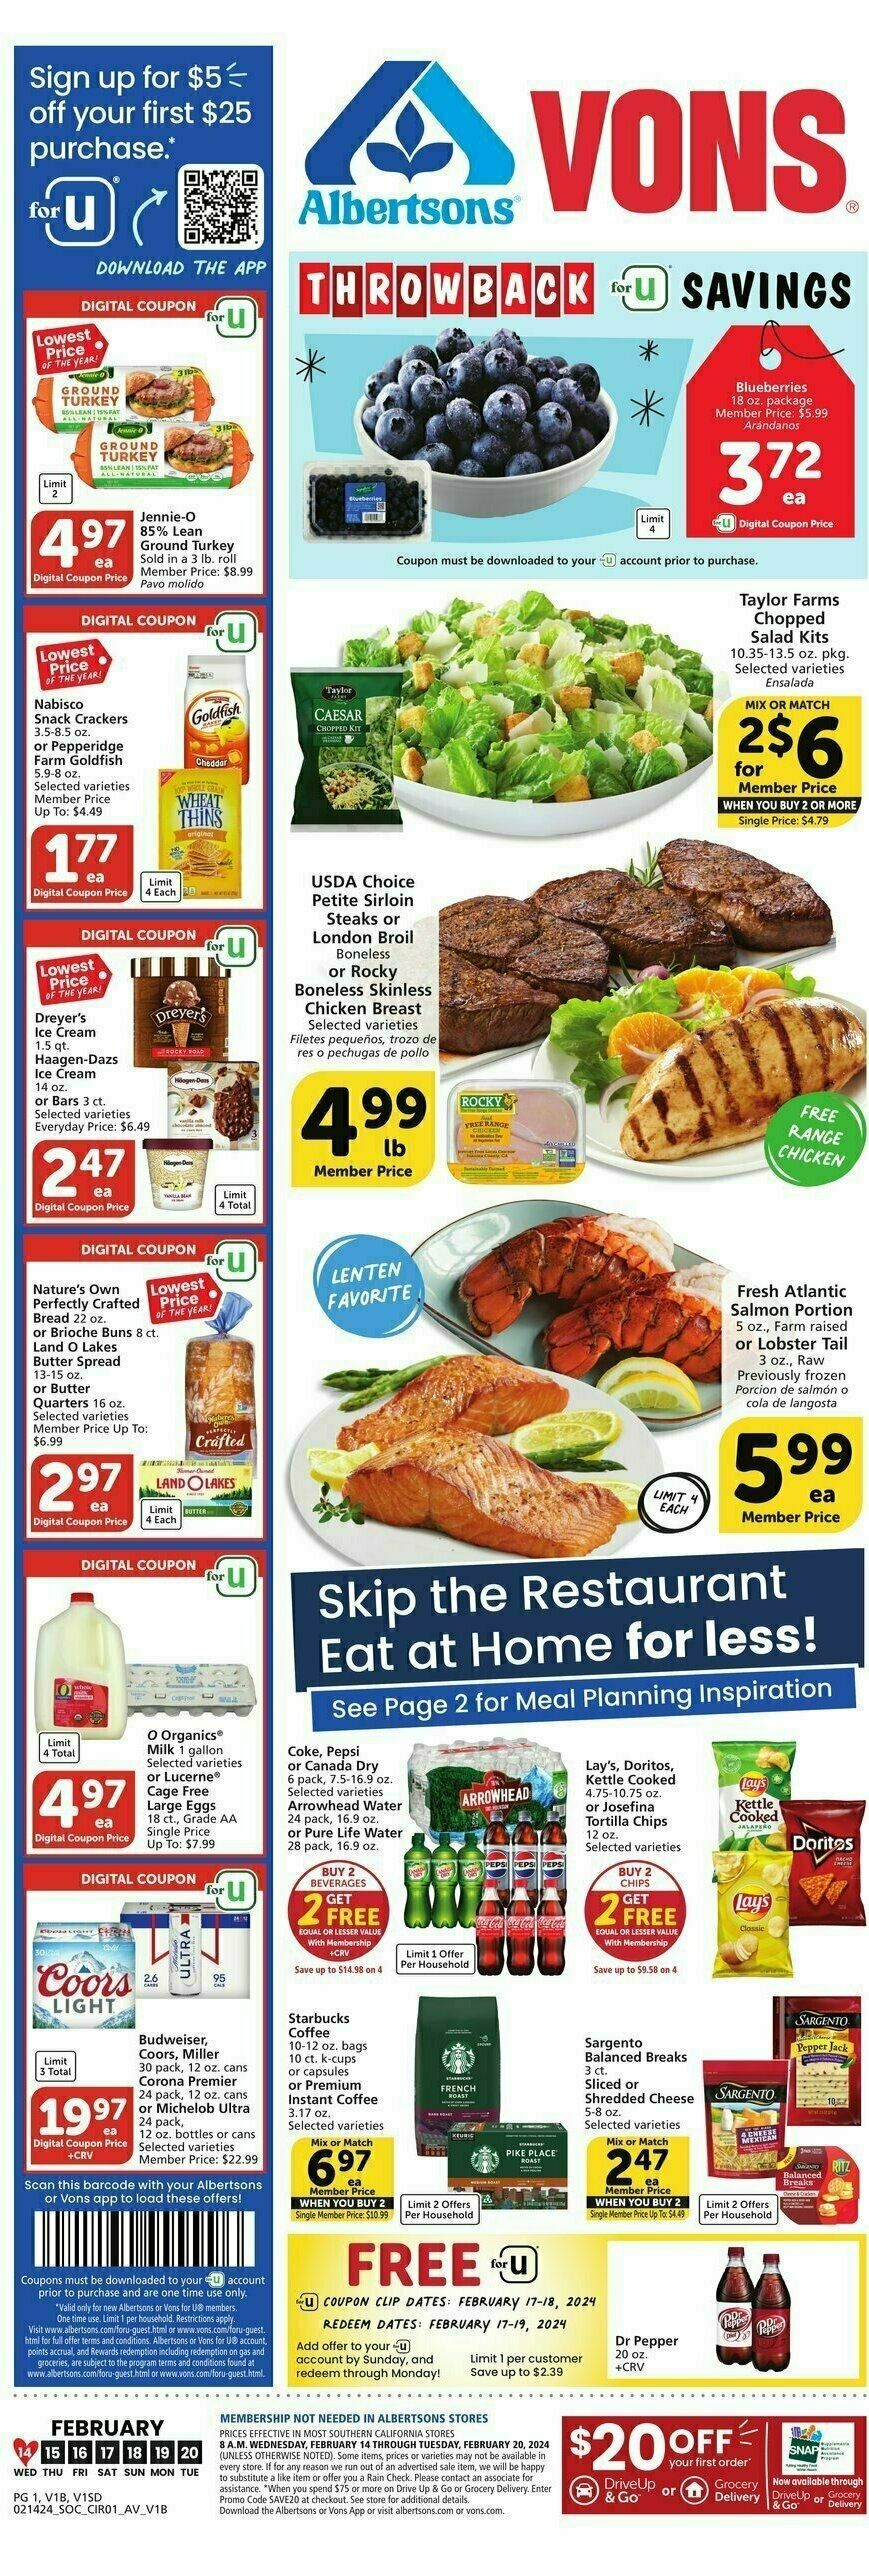 Vons Weekly Ad from February 14